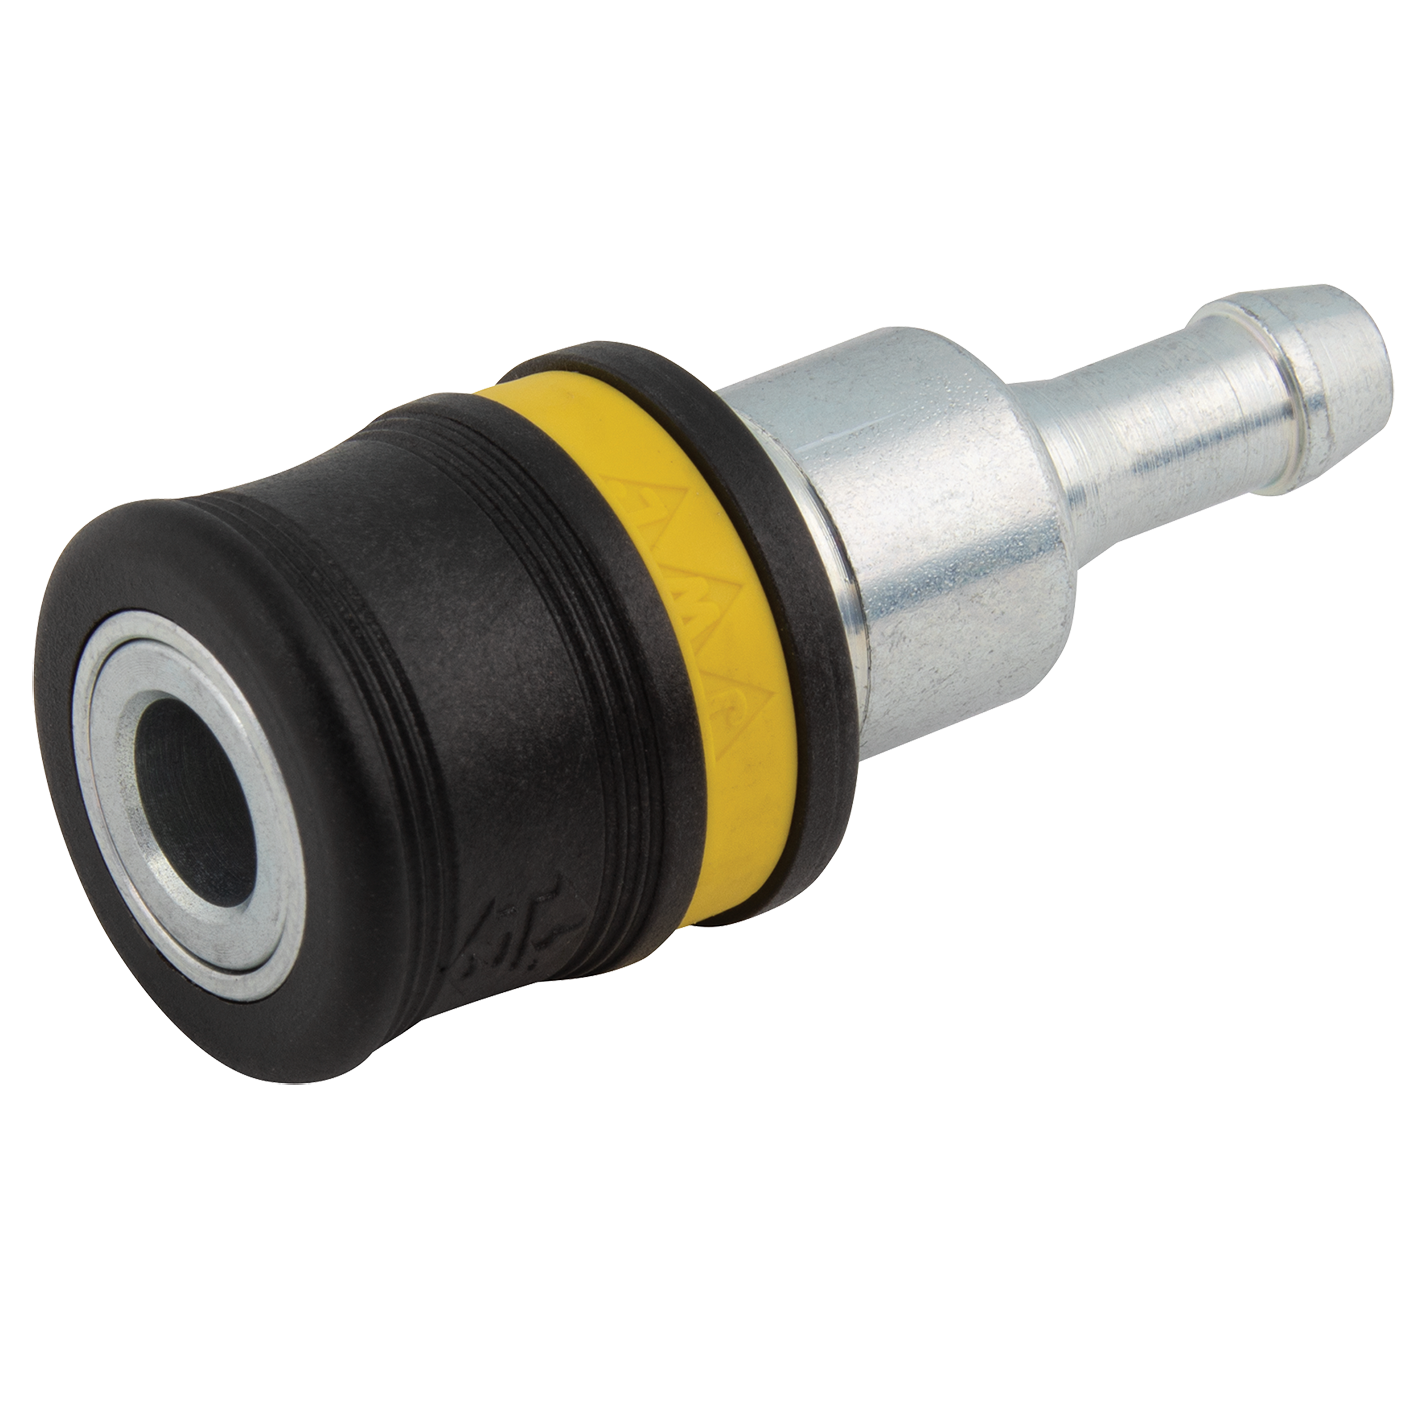 6MM HOSE TAIL ORION 572 SAFETY COUPLING